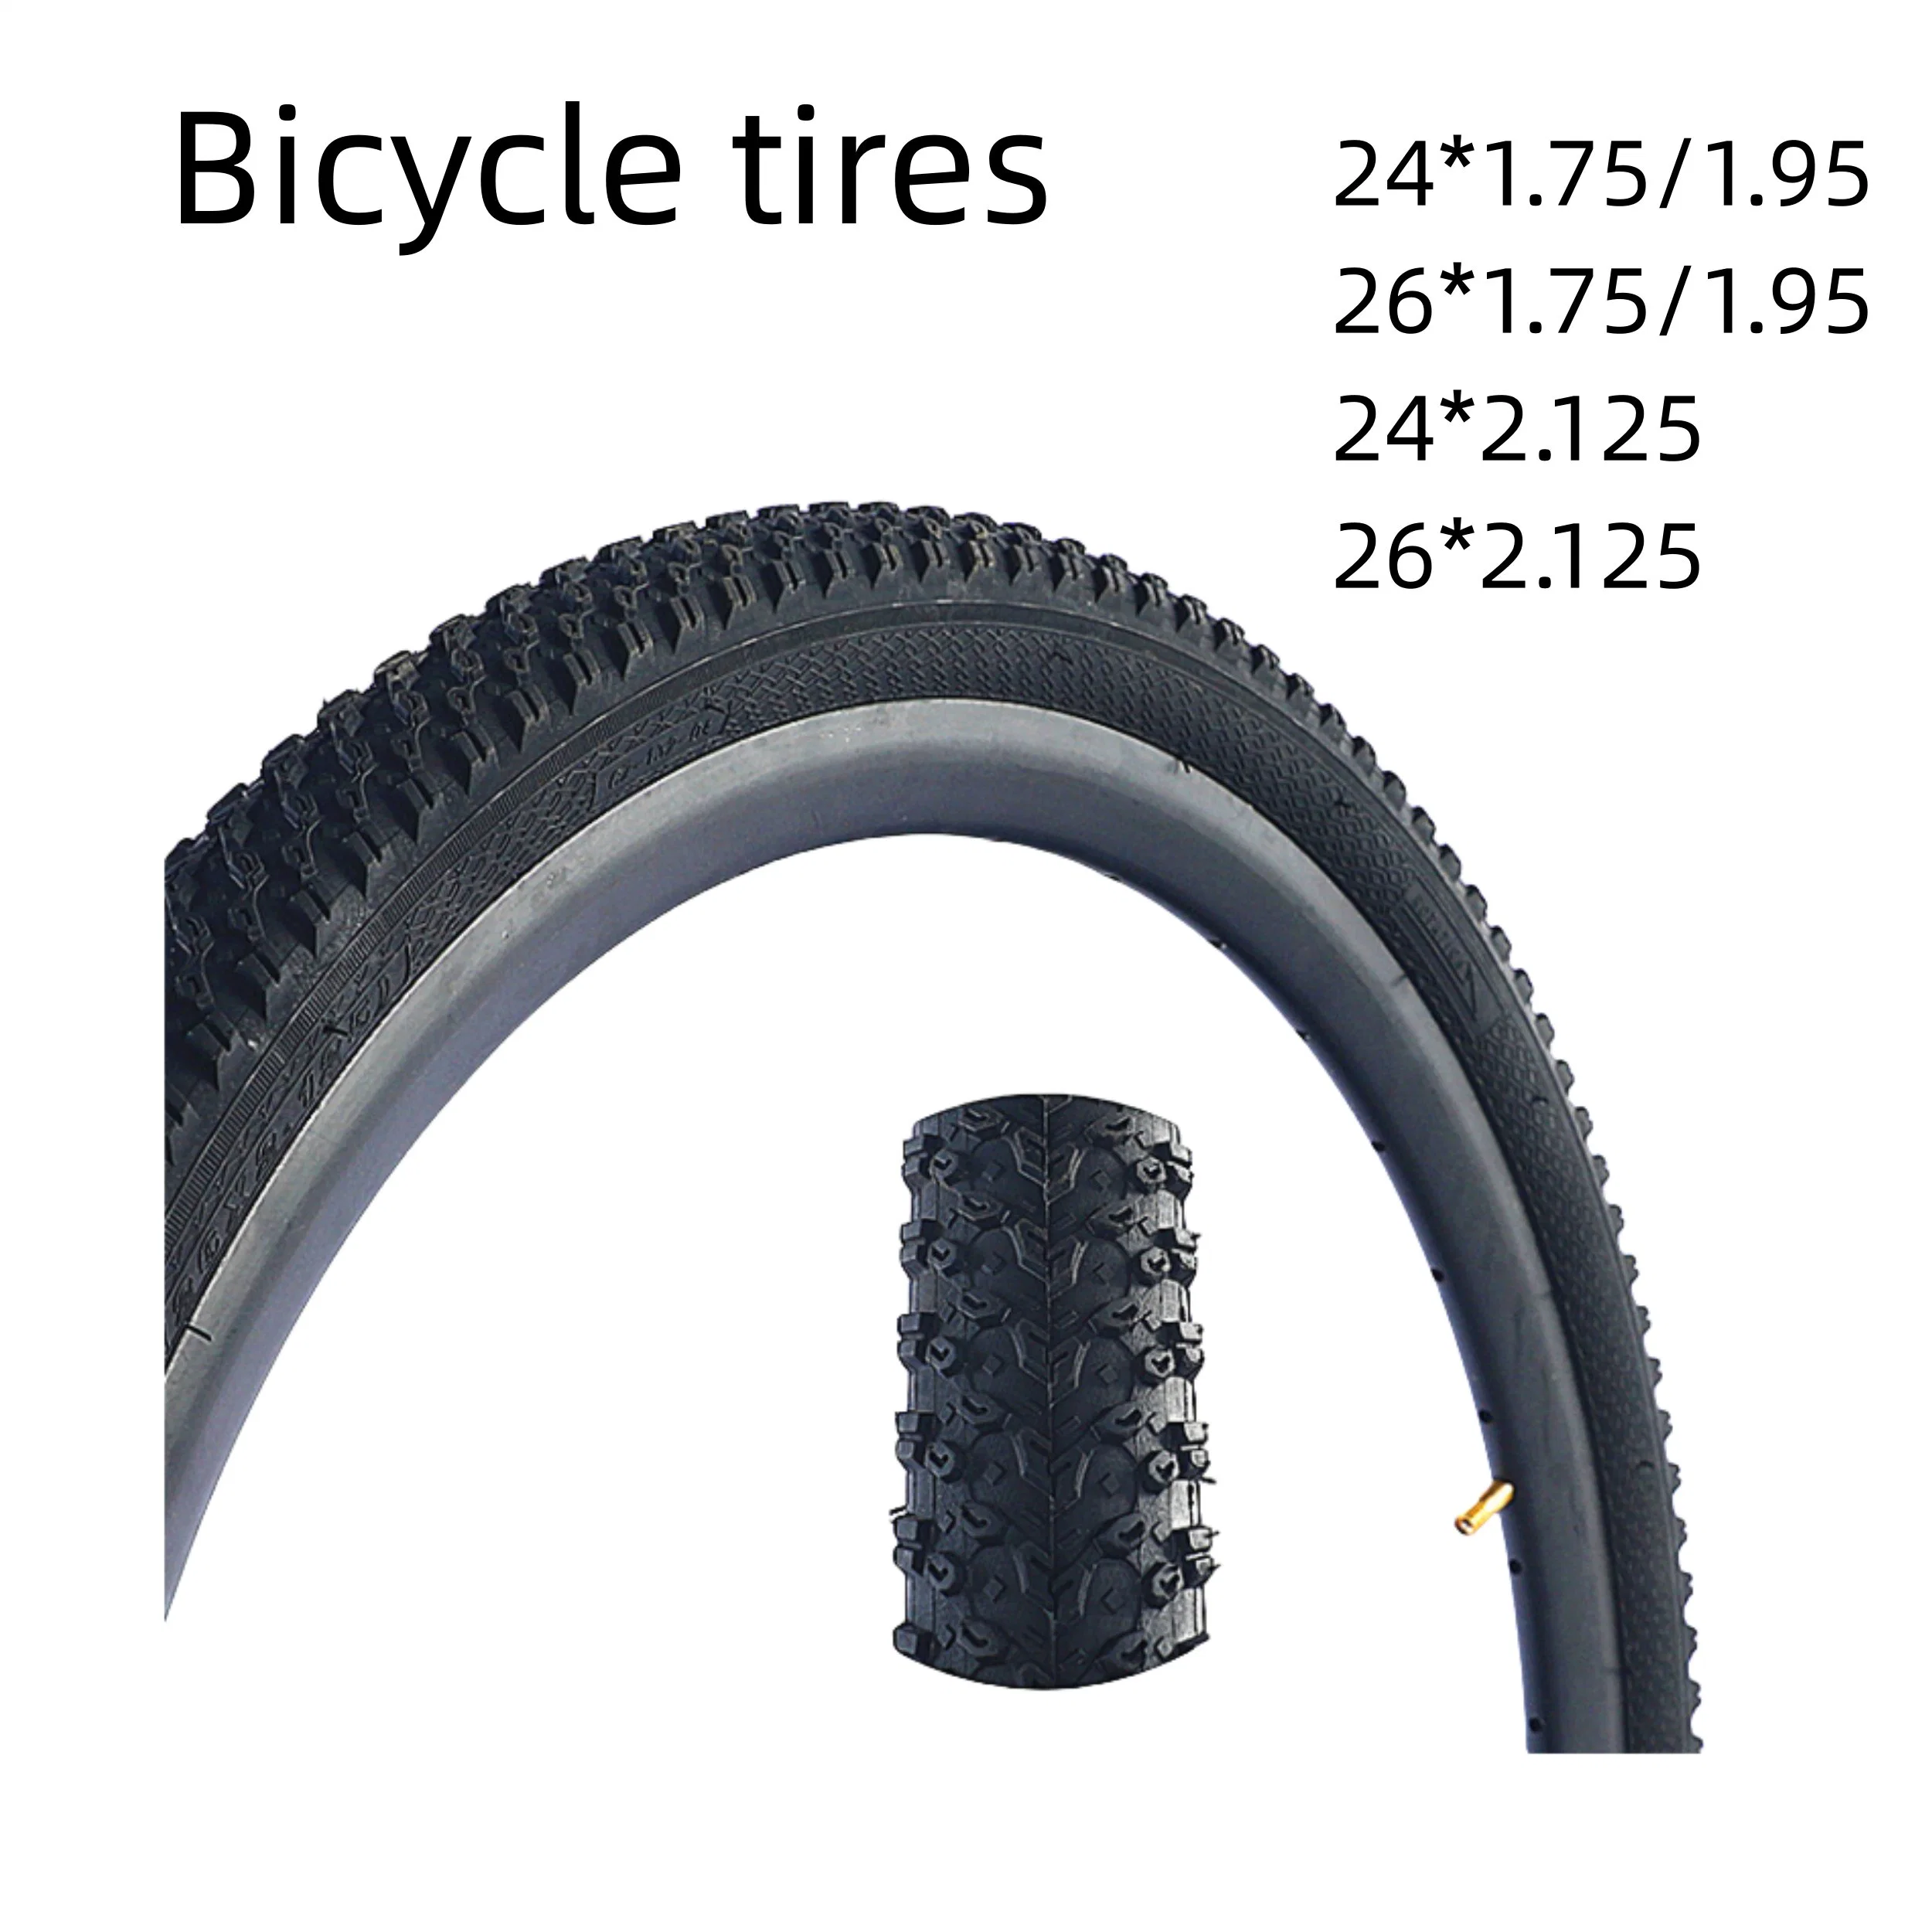 Wholesale of High-Quality Bicycle Tires of Various Models